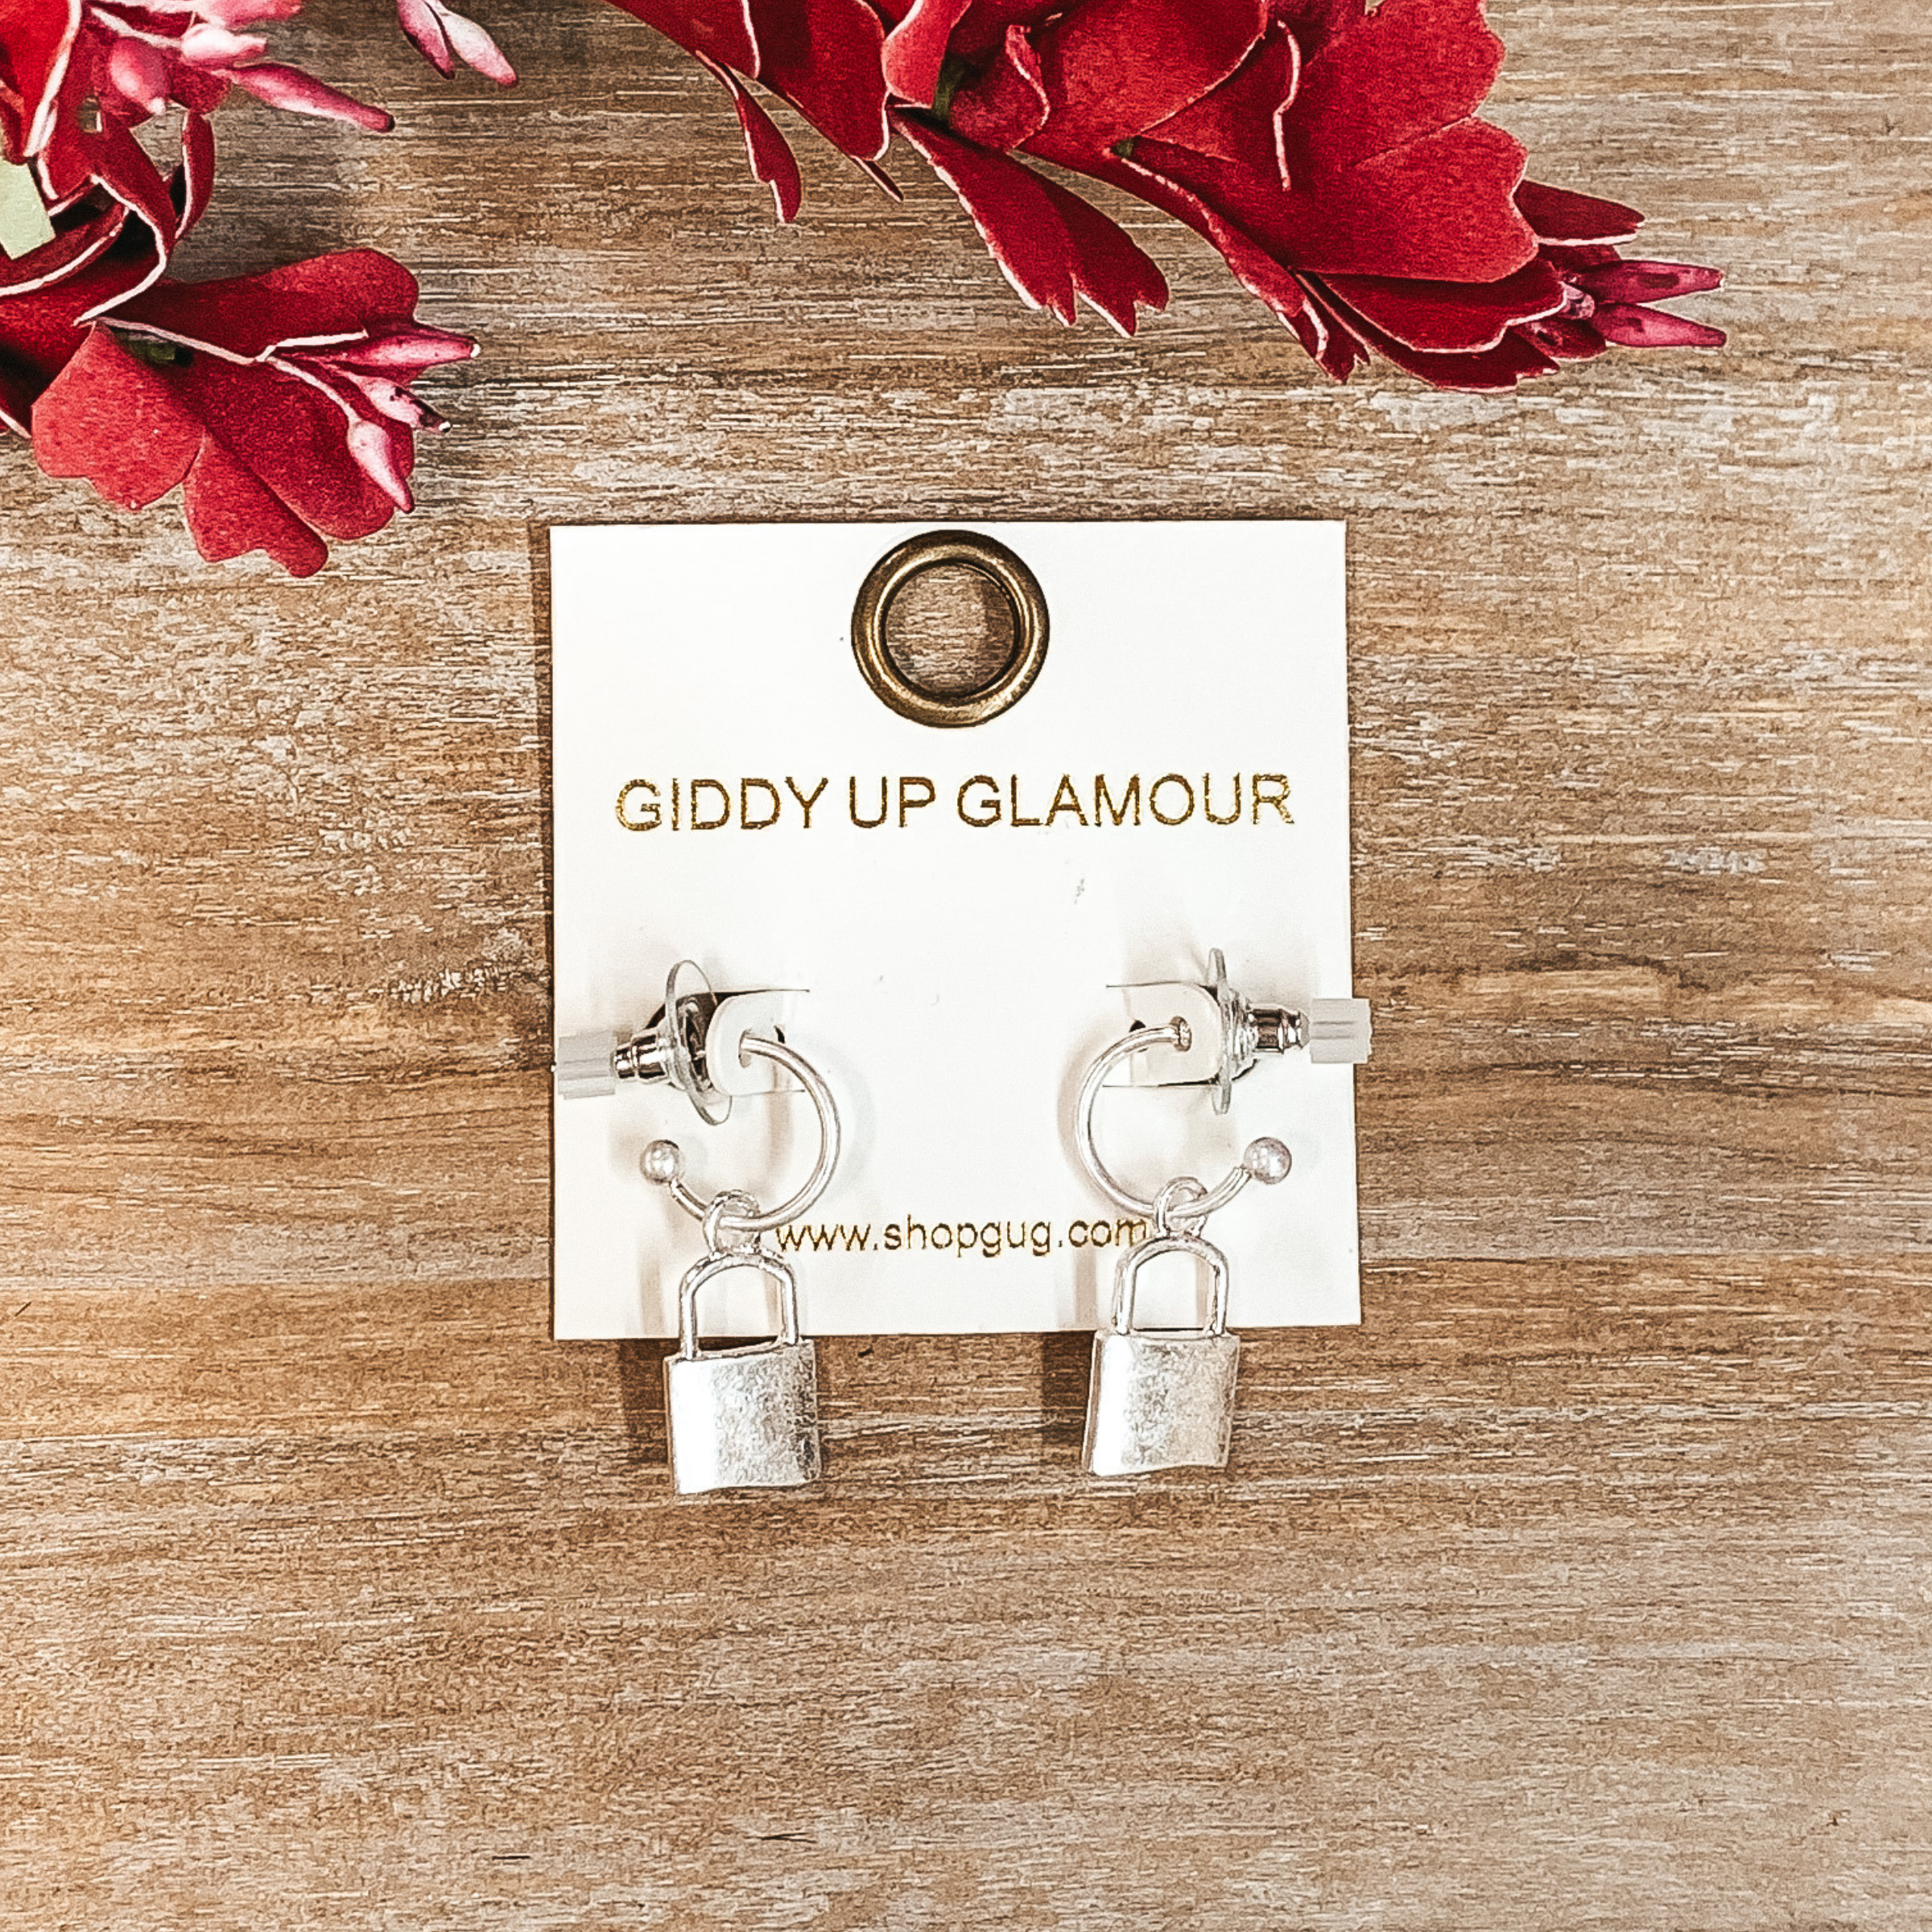 Lock and Key Small Hoop Earrings in Silver Tone - Giddy Up Glamour Boutique